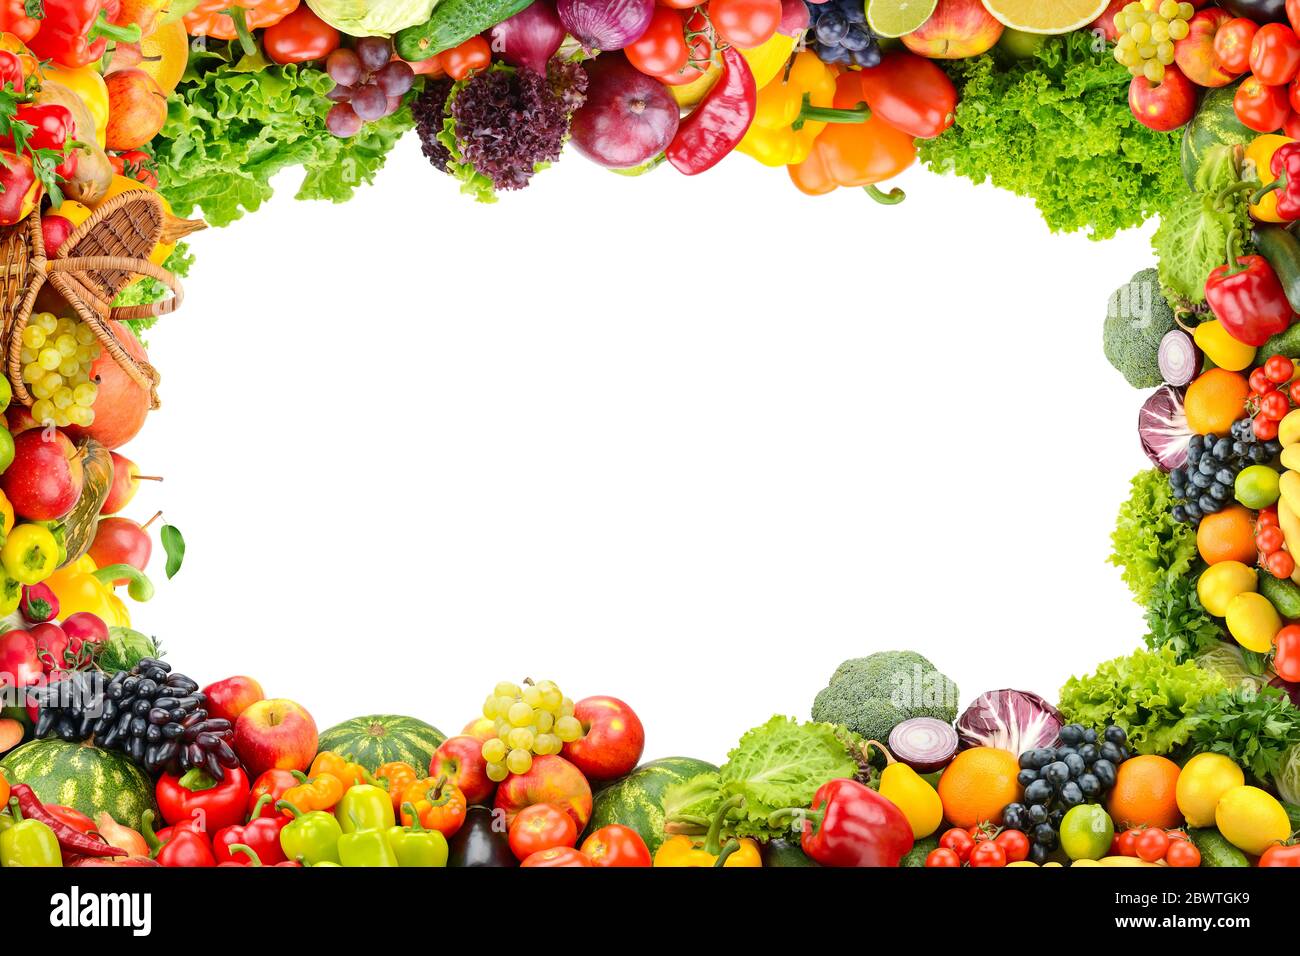 Collage fresh and healthy vegetables and fruits in form frame isolated on white background. Free space. Stock Photo